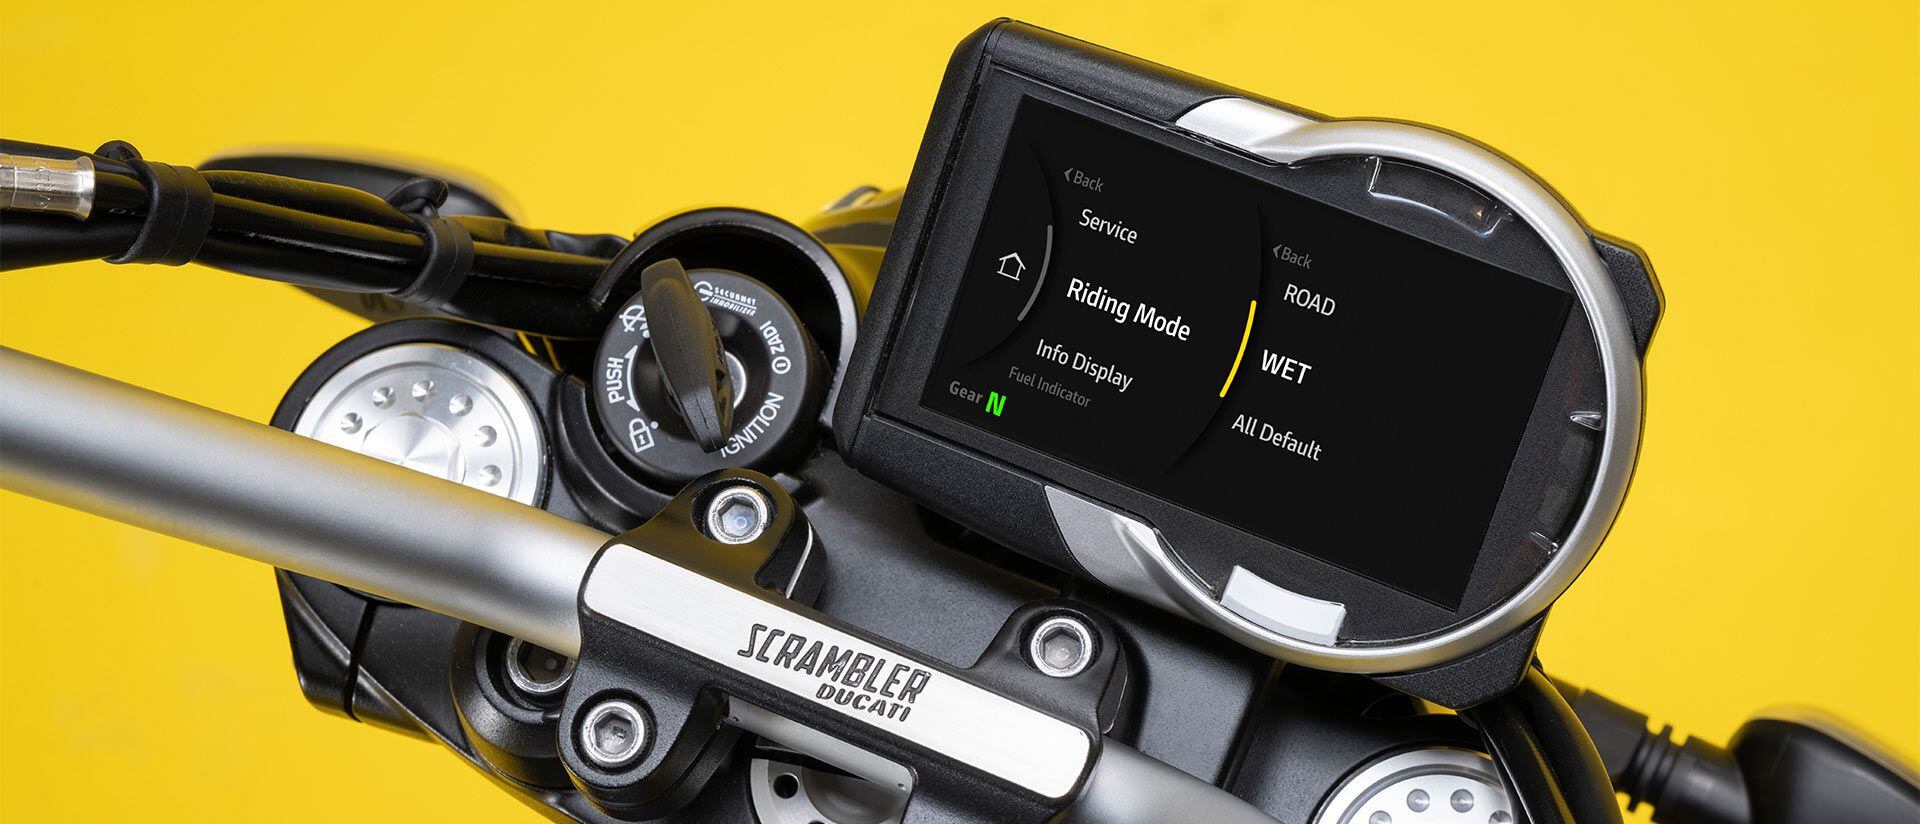 New 4.3-inch TFT instrumentation gives the dashboard a modern look while displaying new ride modes and other electronics.